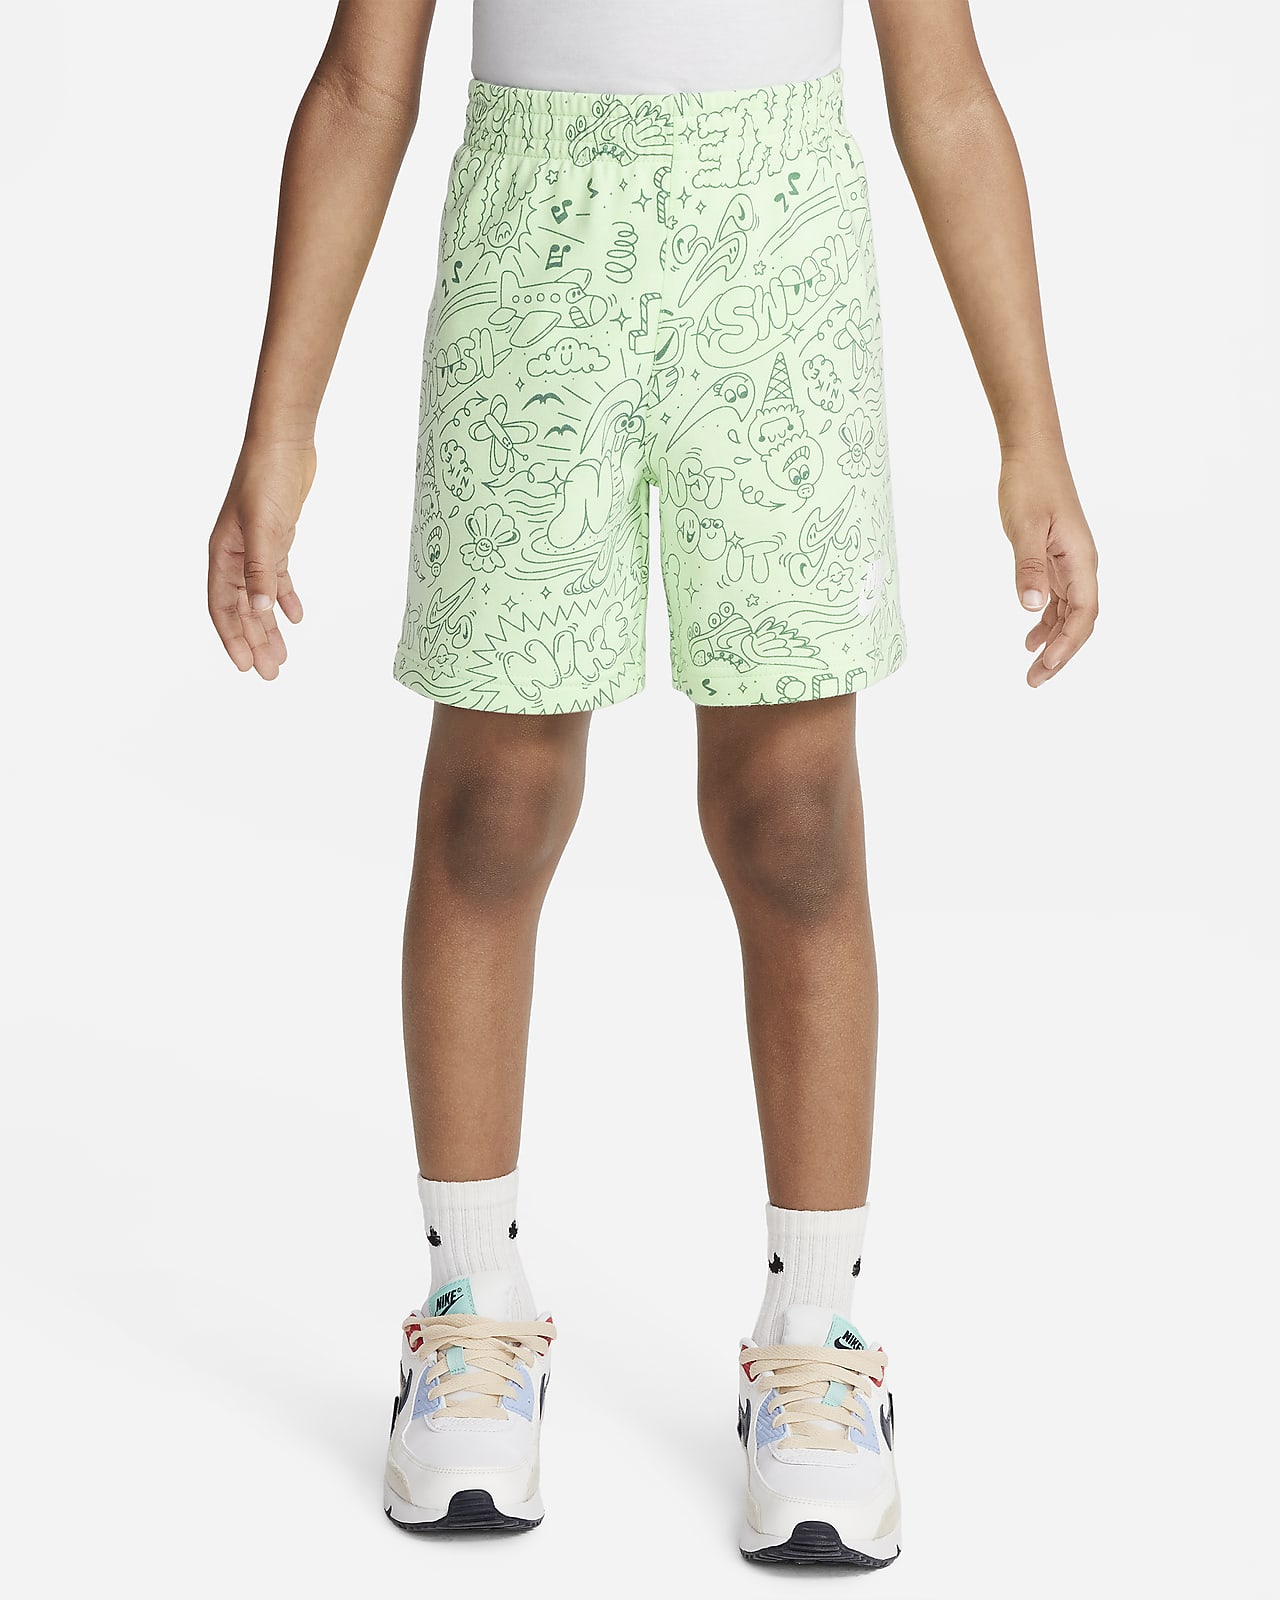 Nike Sportswear Create Your Own Adventure Little Kids' T-Shirt and Shorts  Set